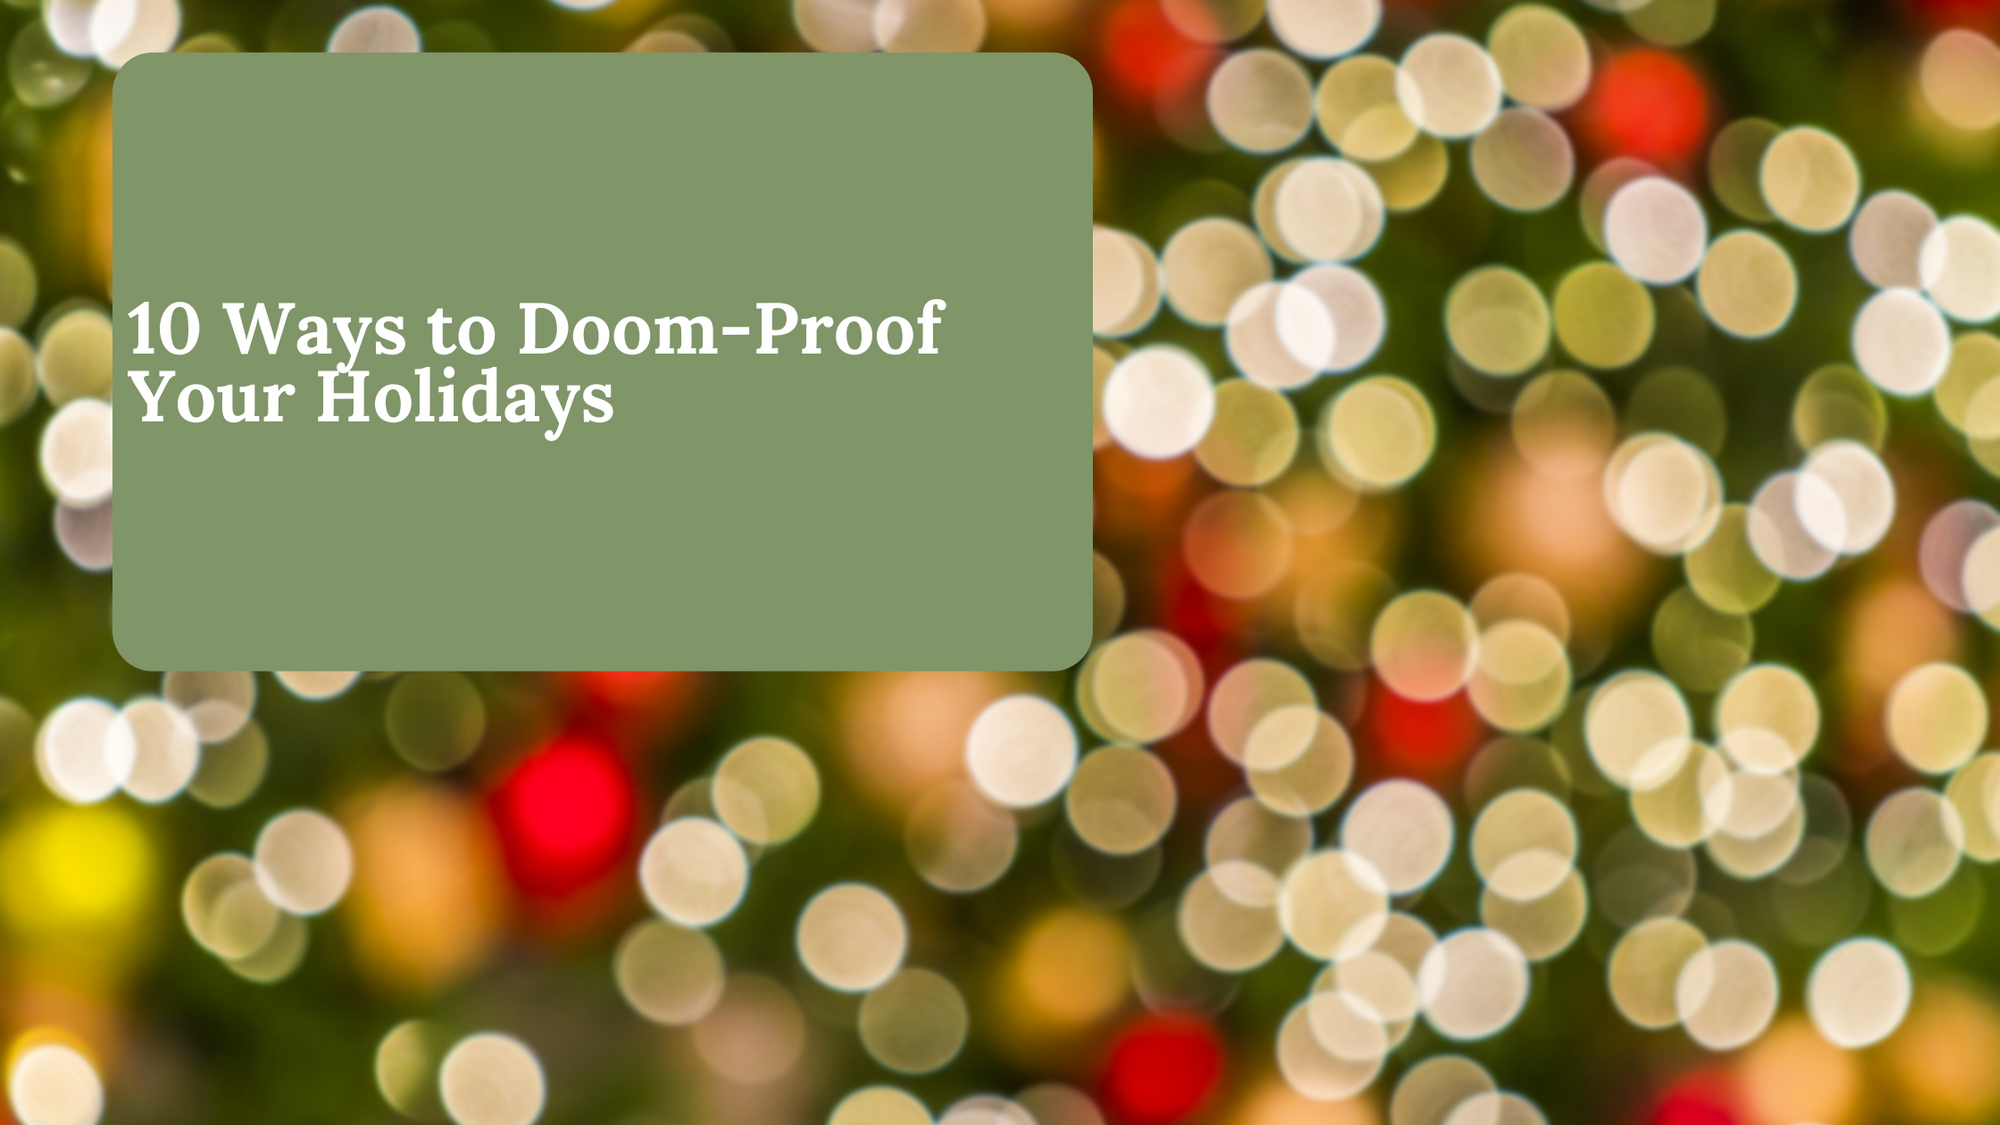 How to Doom-Proof your Holiday Season: